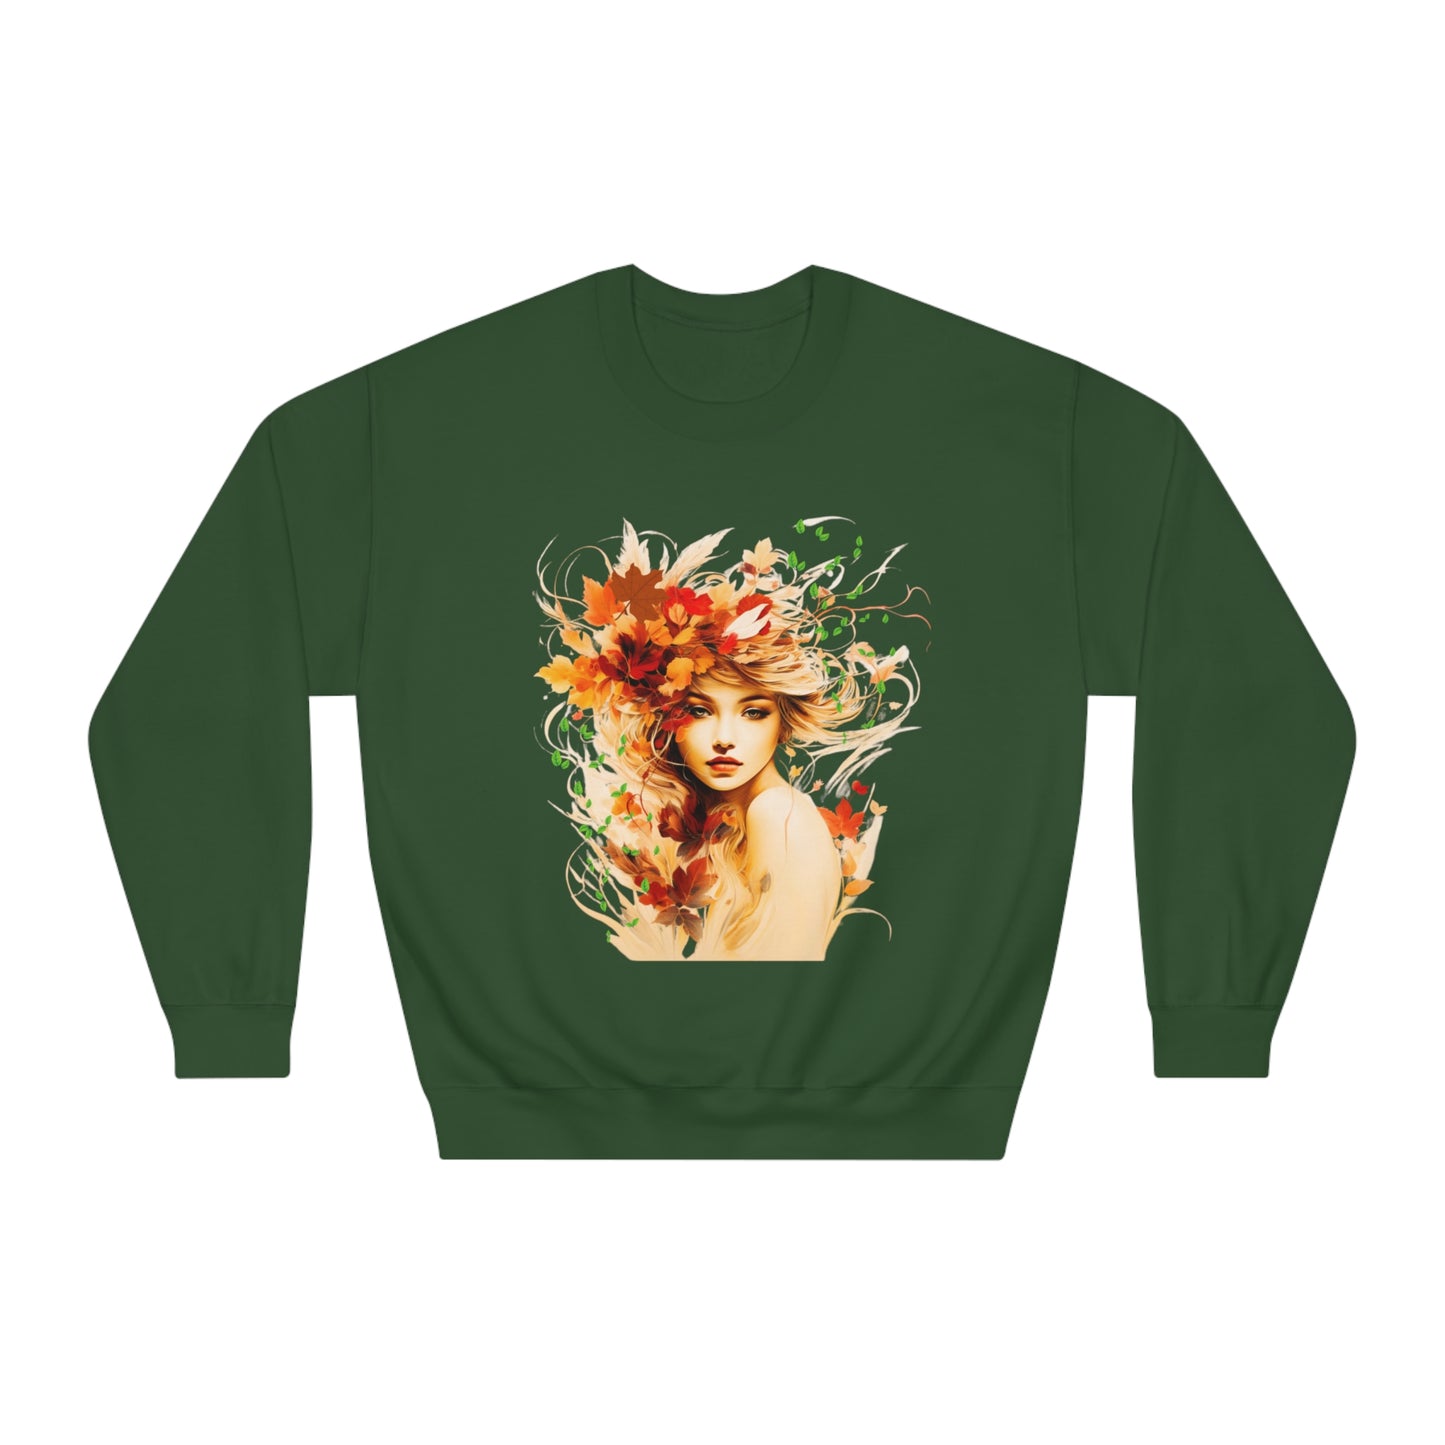 Whimsical Dreams in Autumn Hues: Romantic Dreamy Female Surrounded by Autumn Leaves Sweatshirt - Fairycore, Forestcore, Cottagecore-inspired Fashion Sweatshirt Forest Green S 